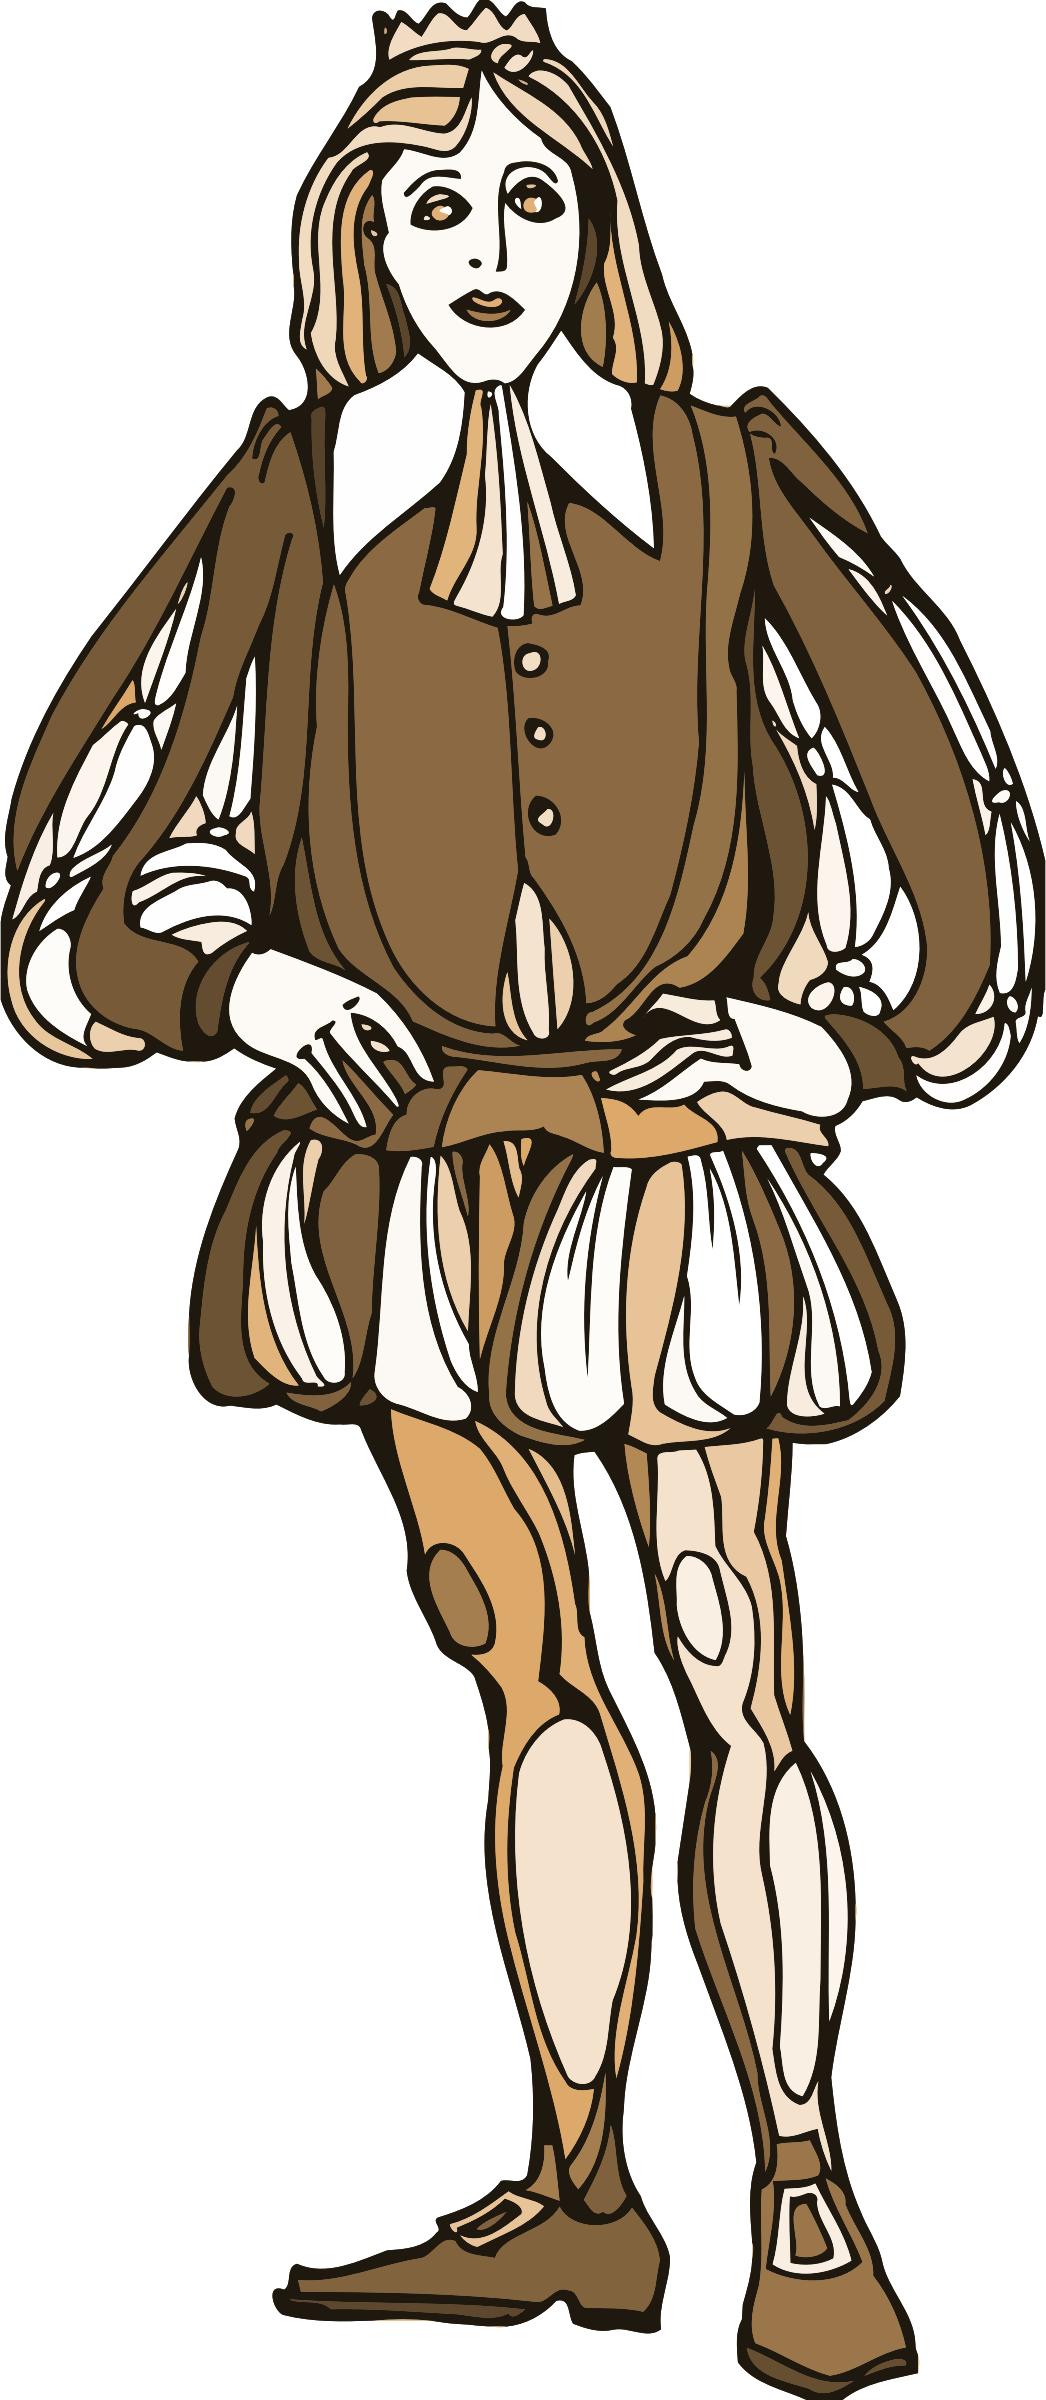 Shakespeare characters - prince png